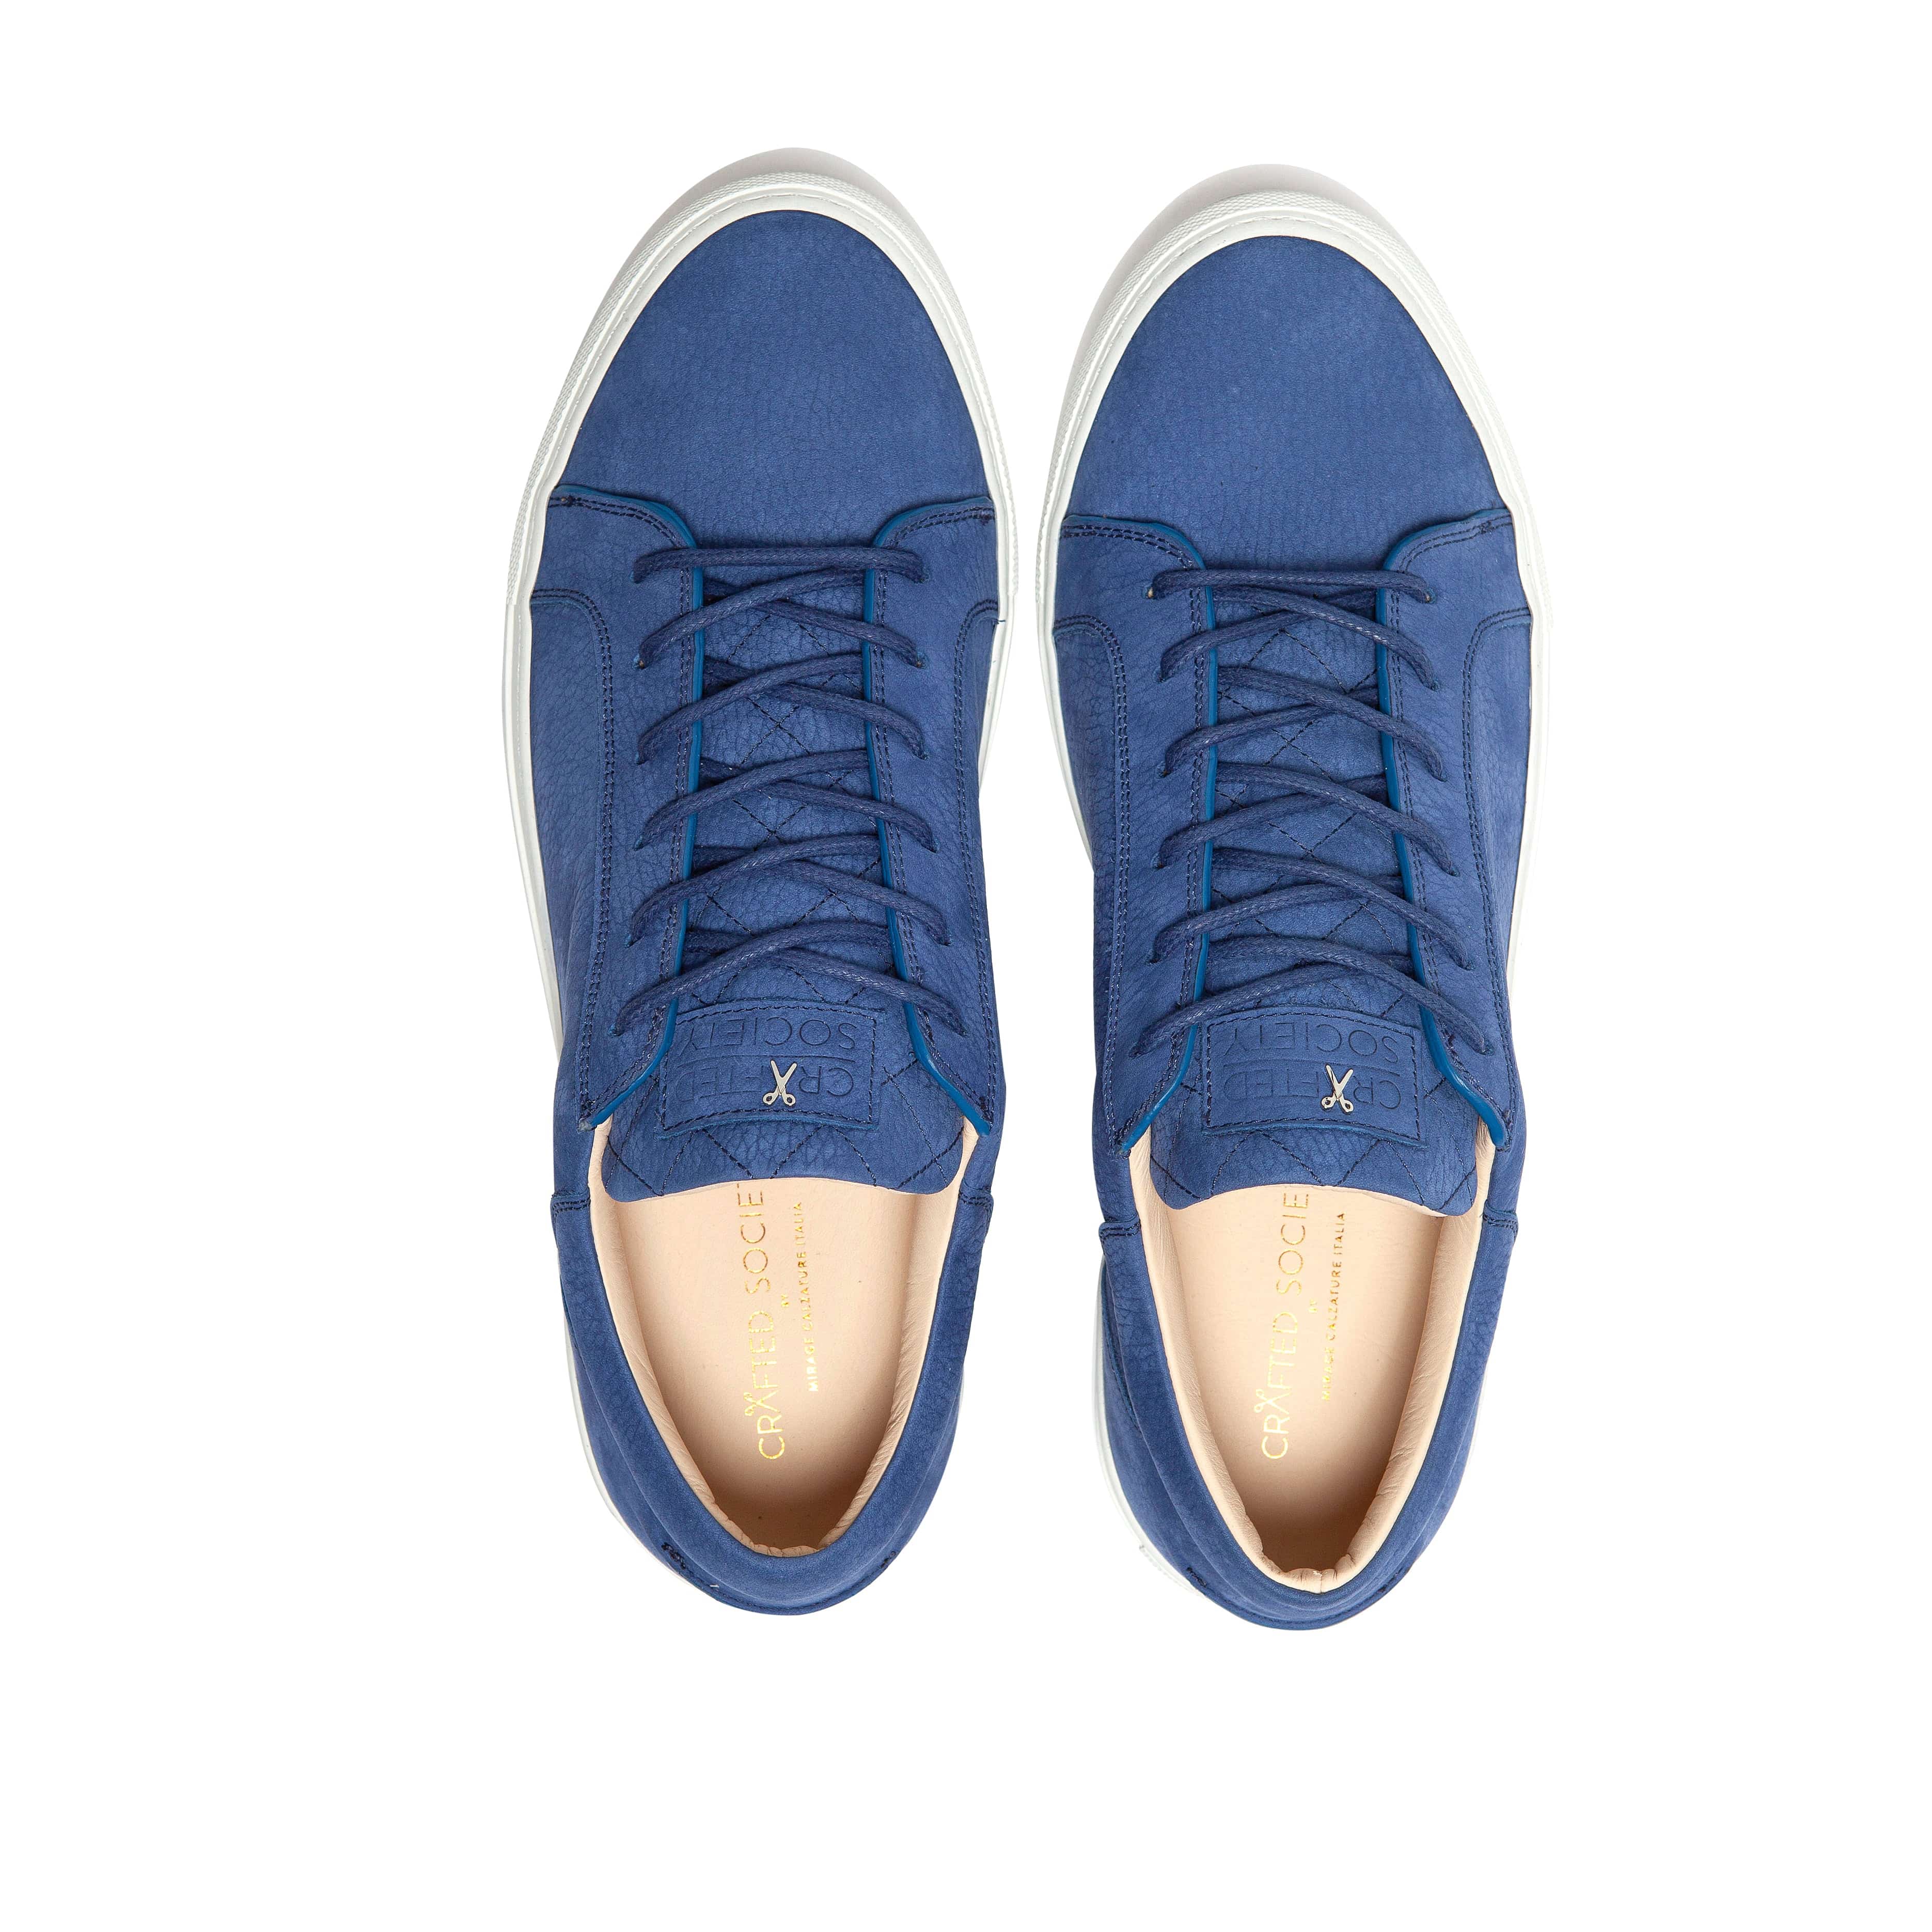 Mario Low Refined Sneaker | Royal Blue Nubuck | White Outsole | Made in Italy | Size 41